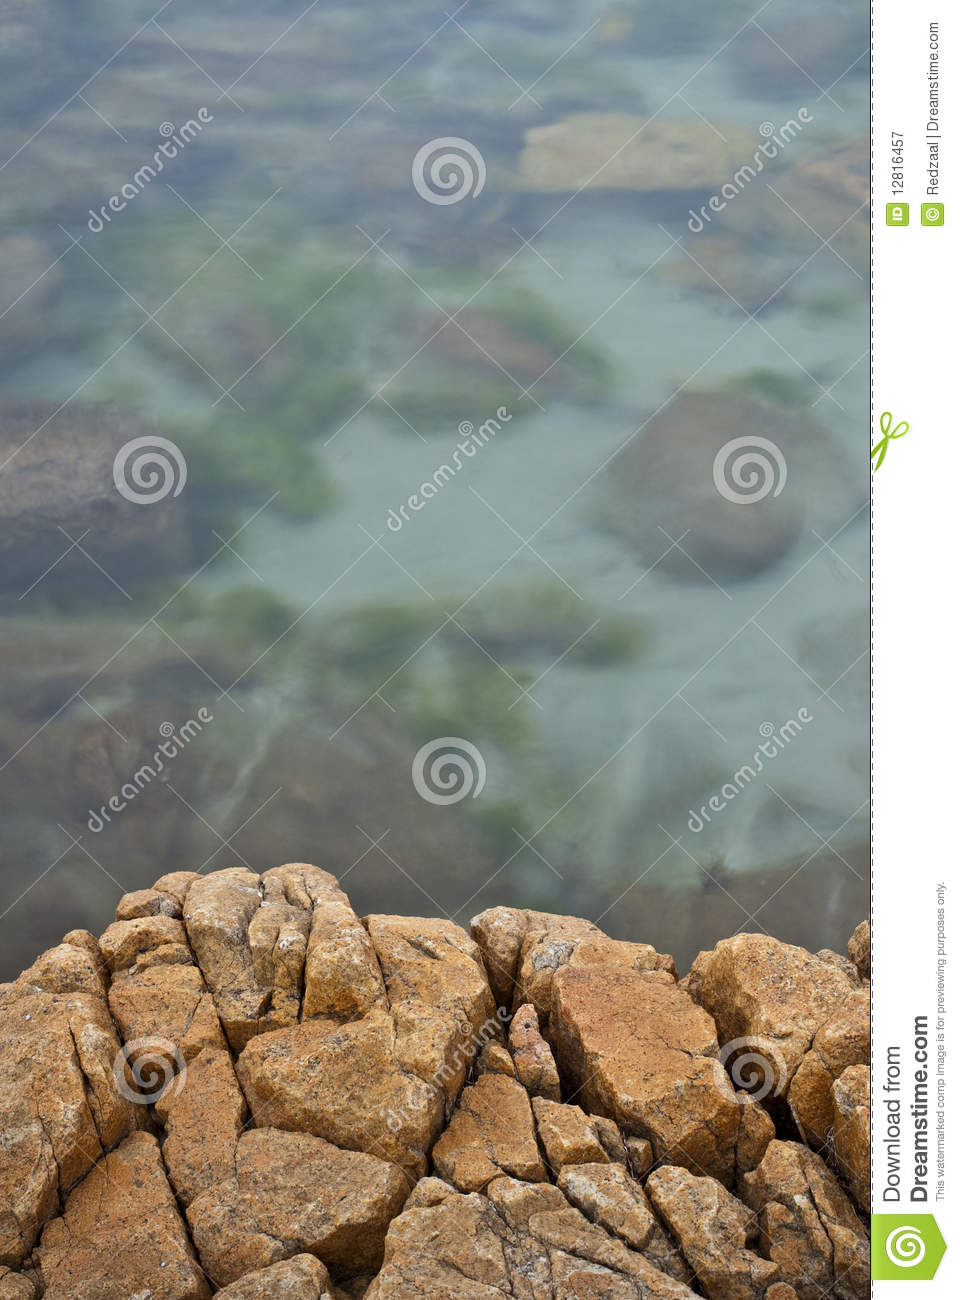 Rock Ledge And Seawater Royalty Free Stock Photography   Image